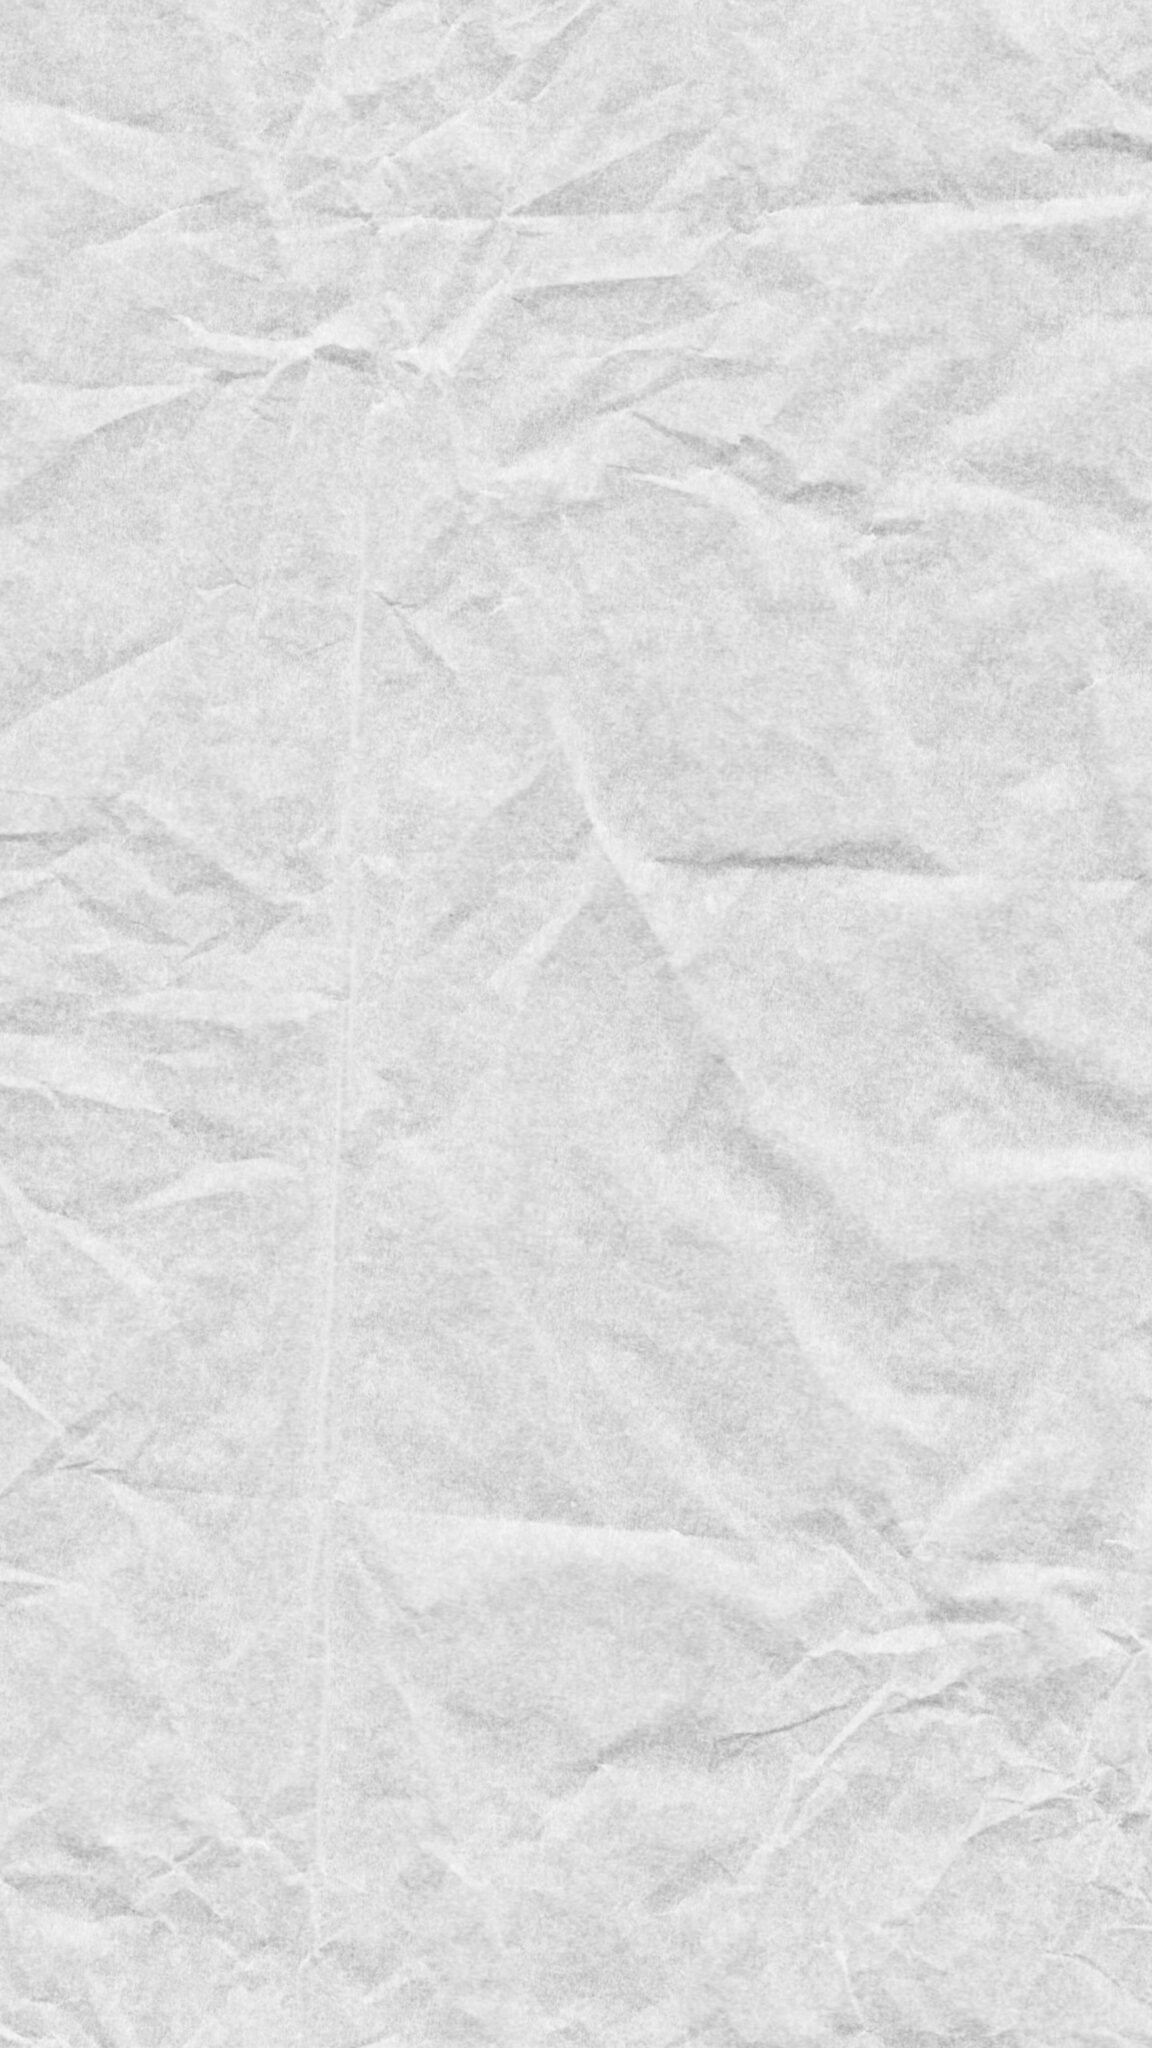 1152x2048 White Paper Texture Wallpaper For Mobile Phone Wallpaper Download Full HD